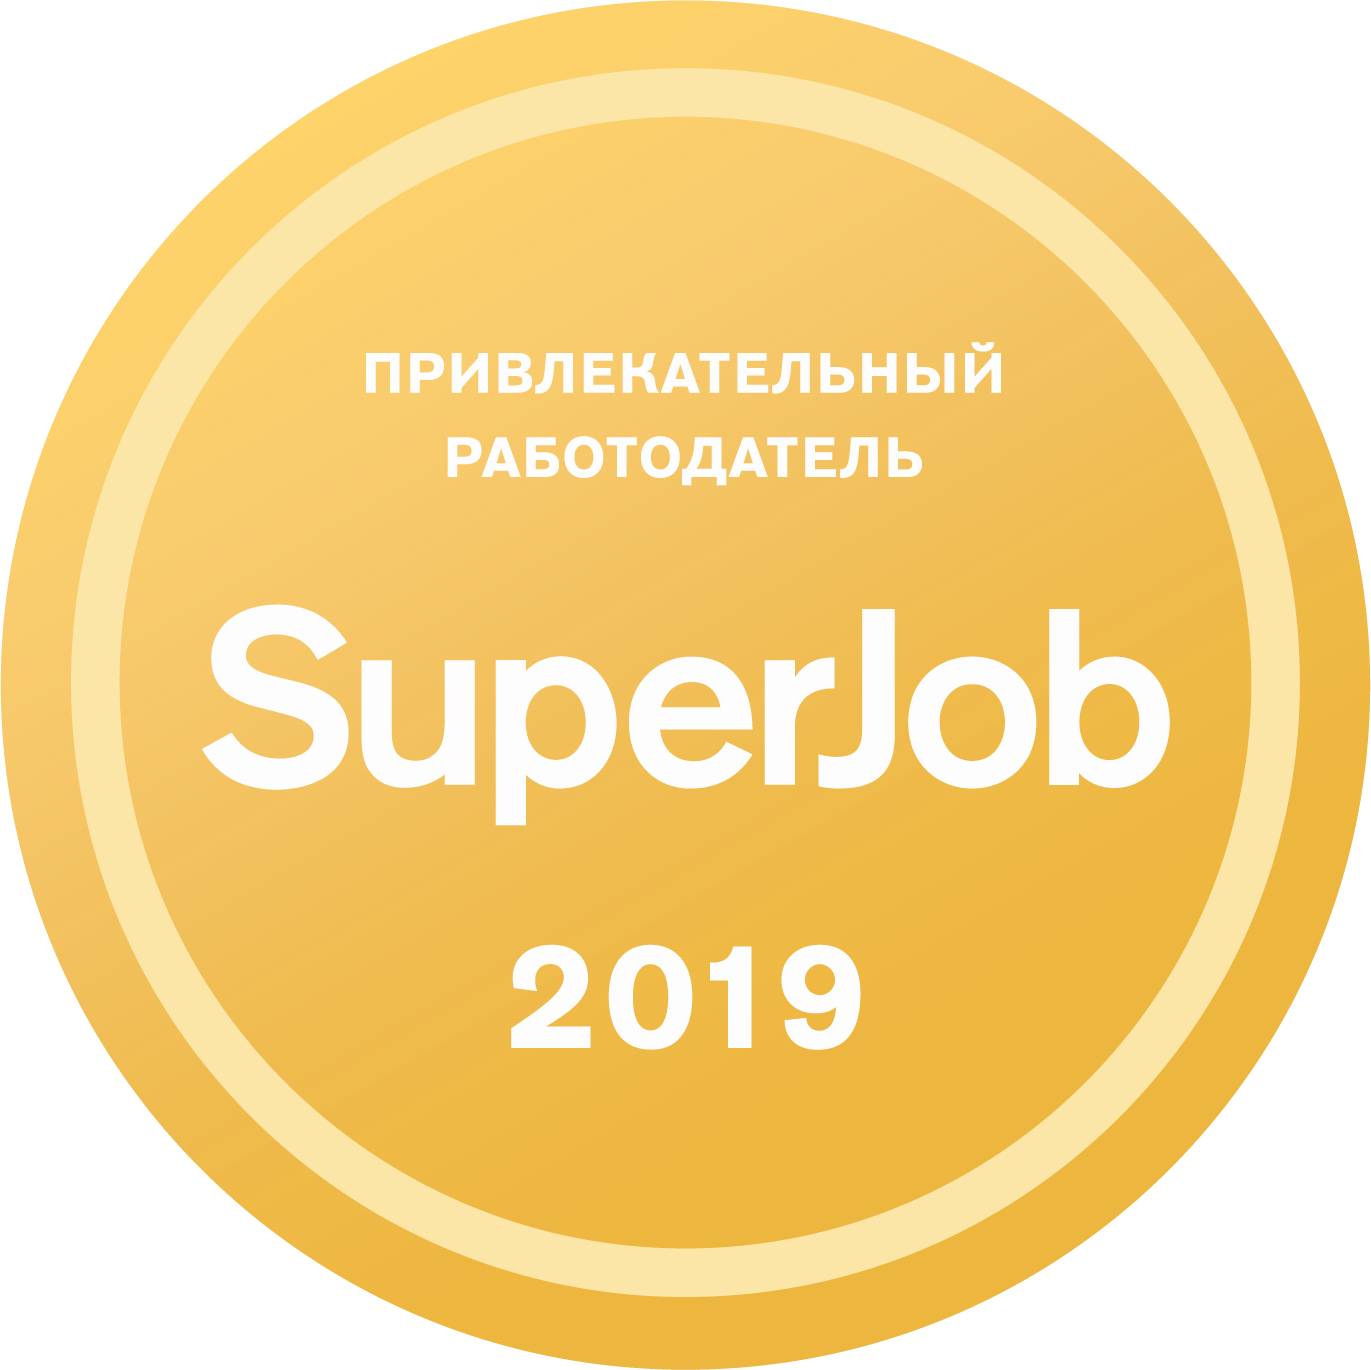 Repropark is an attractive employer according to SuperJob